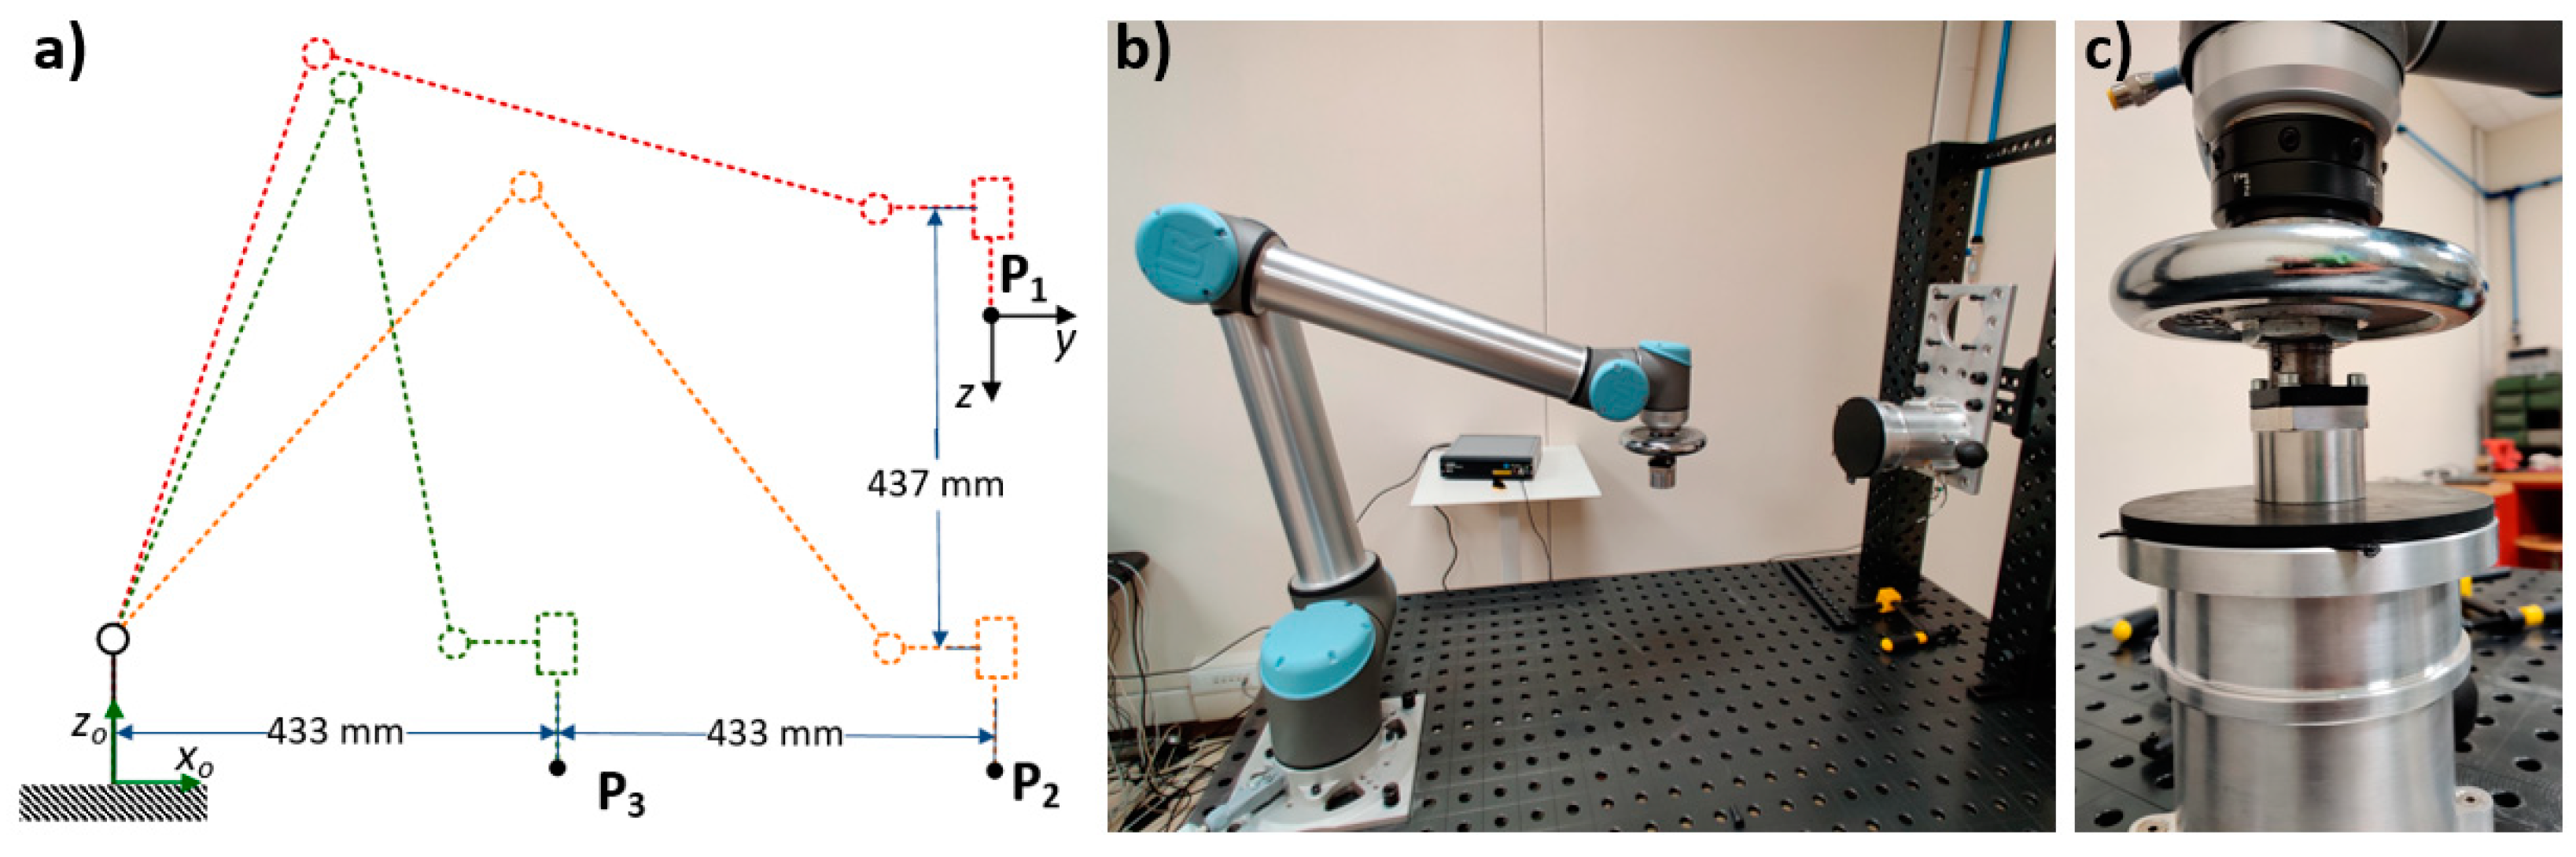 Robotics | Free Full-Text | Validating Safety in Human–Robot Collaboration:  Standards and New Perspectives